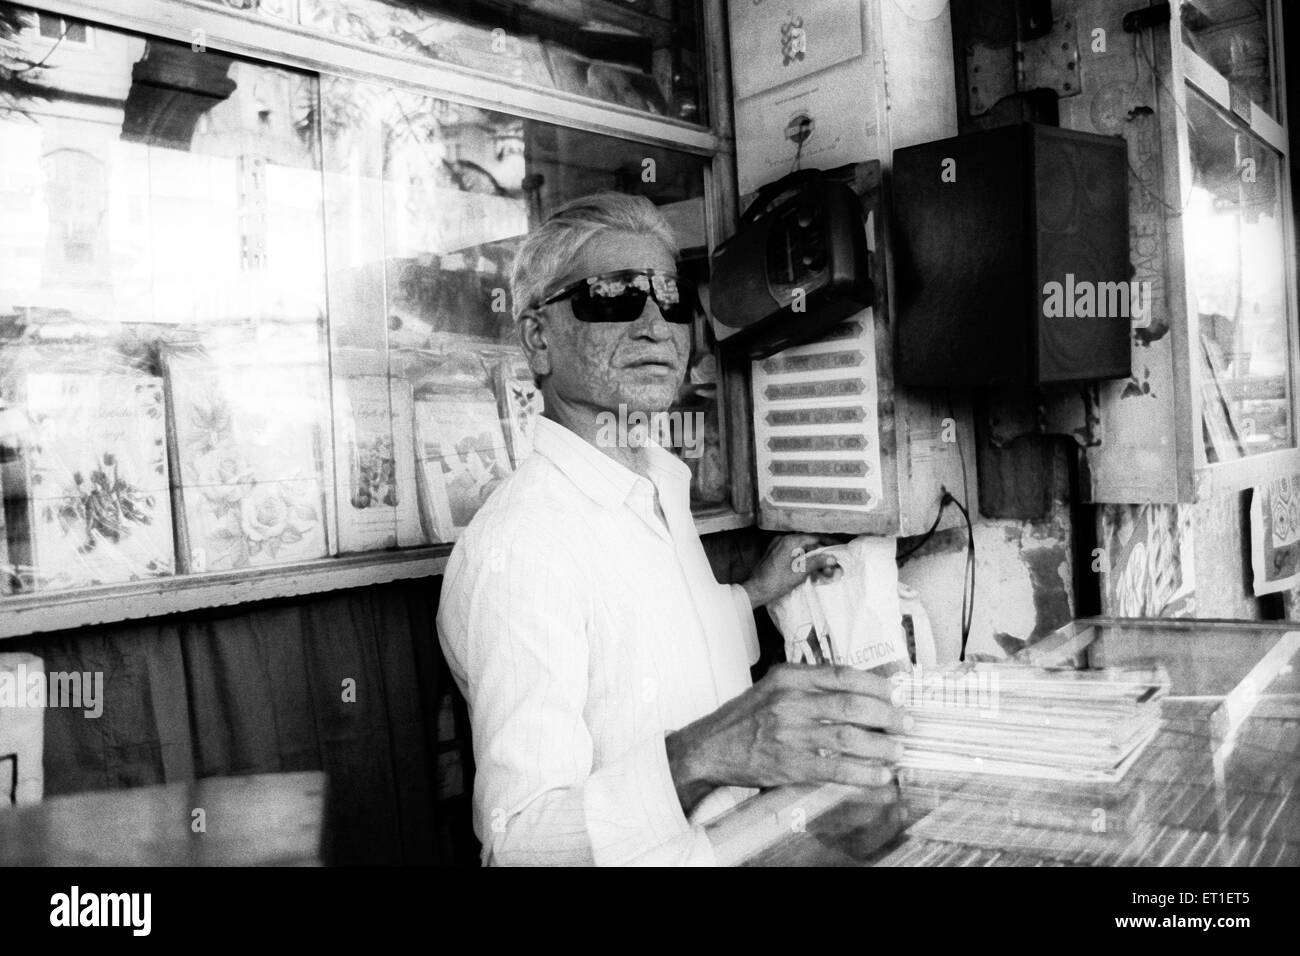 Shopkeeper Black and White Stock Photos & Images - Alamy